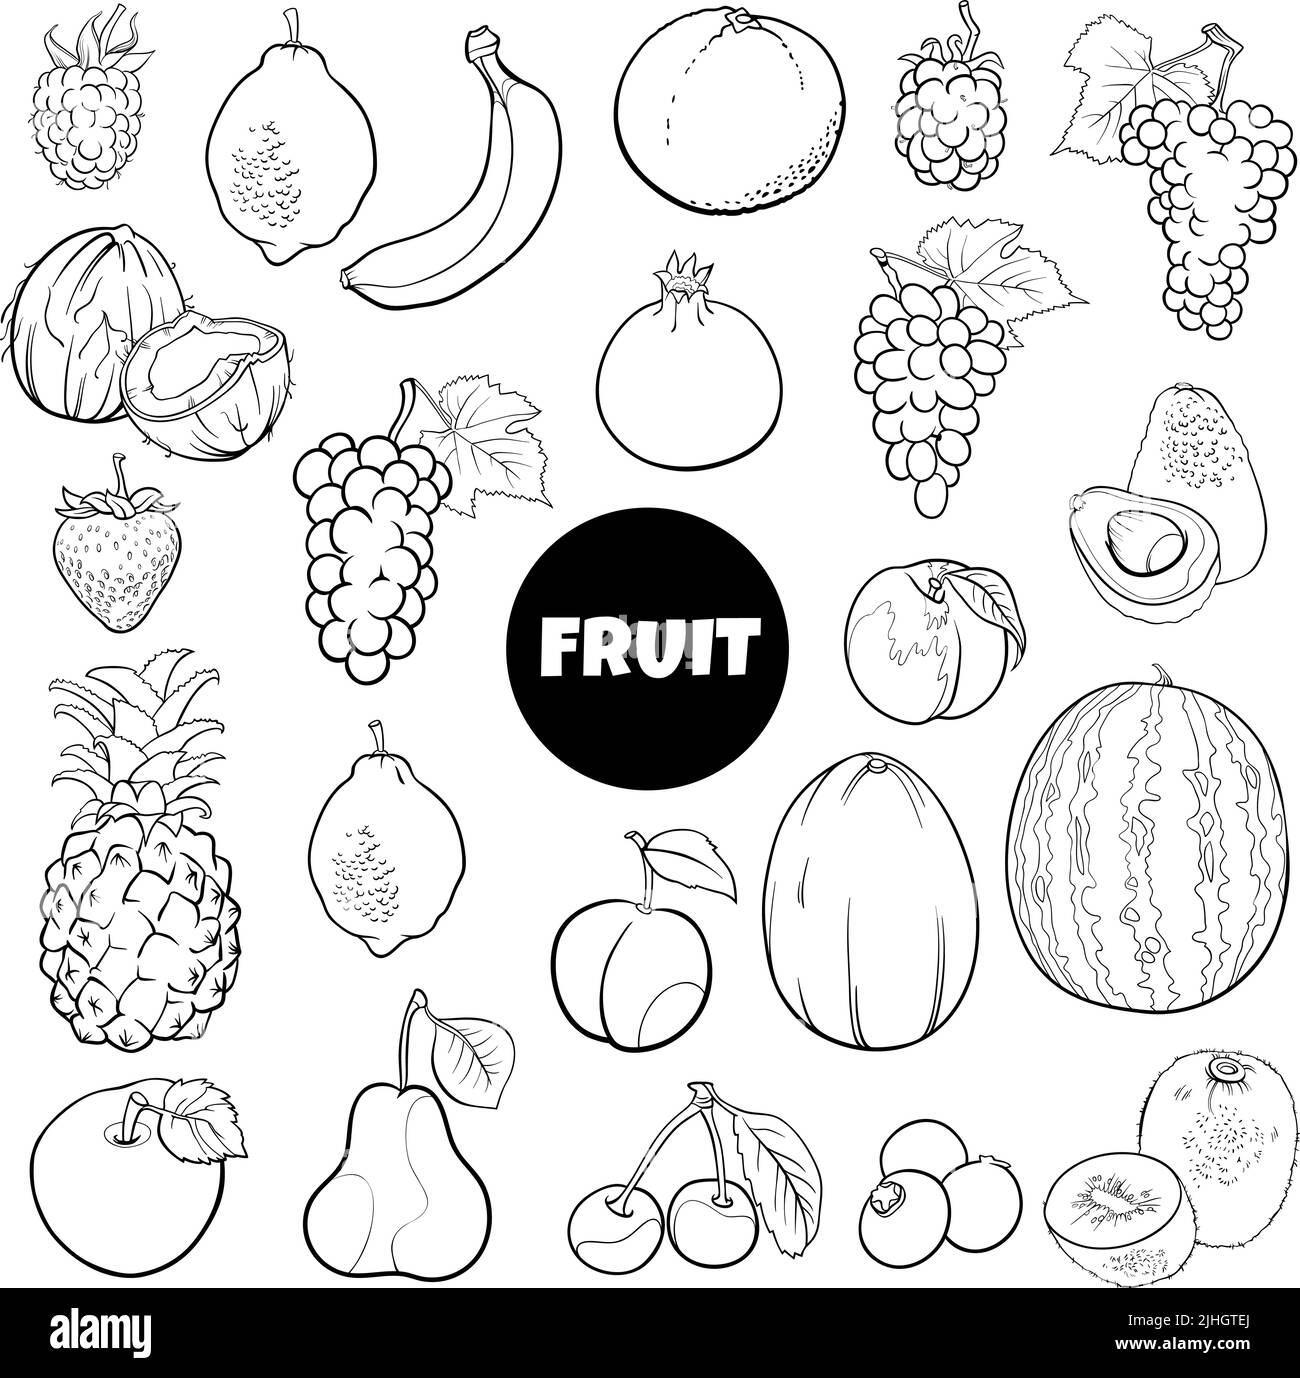 Black and white cartoon illustration of fresh fruit food objects set coloring page Stock Vector